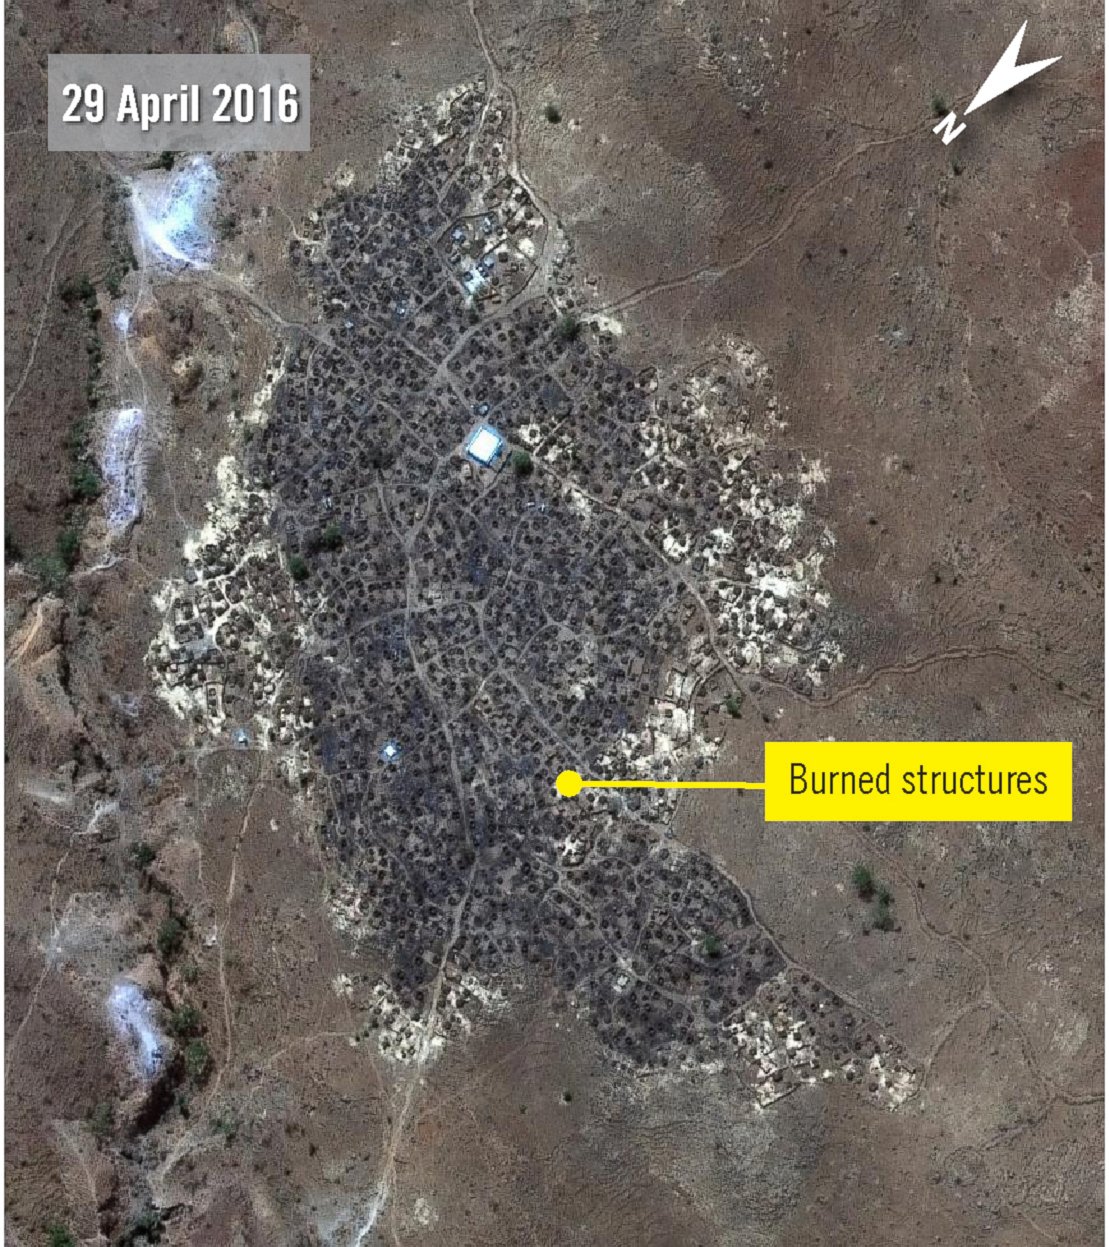 PHOTO: Karmal after attack - Imagery from 29 April 2016, shows Karmal village has been almost completely razed by fire. Only a few thatched roof tukuls, on the outer edges of the village, appear undamaged.